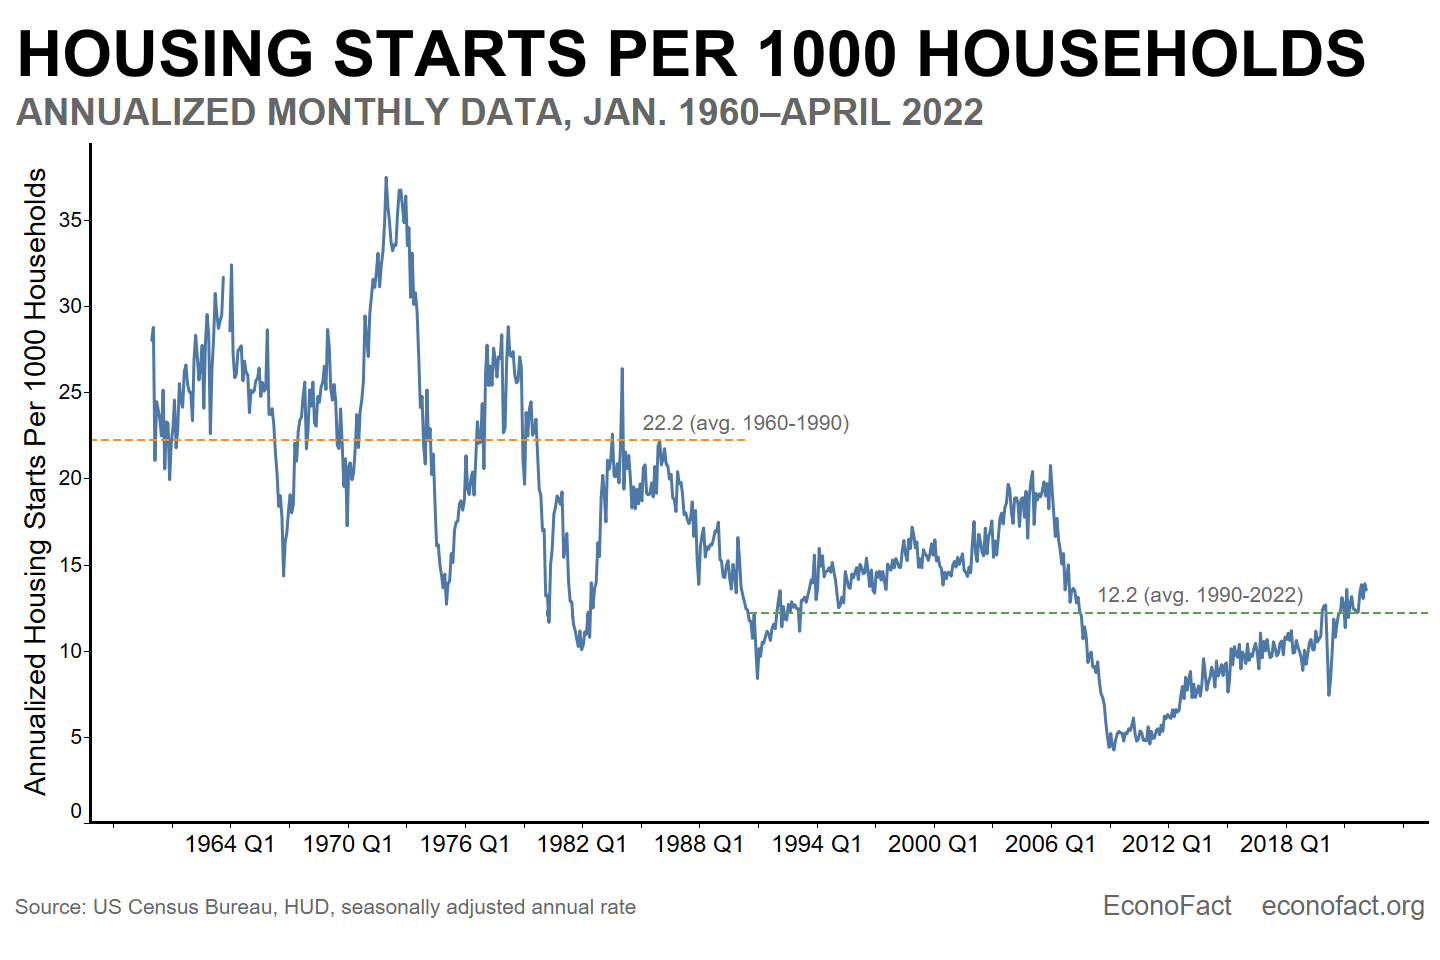 Housing starts per 1000 households. Annualized monthly data from January 1960 to April 2022. There is an overall trend of the housing starts decreasing over time, with the average from 1960-1990 being 22.2 housing starts per 1000 households. In contrast, the average housing starts per 1000 households from 1990-2022 was only 12.2.